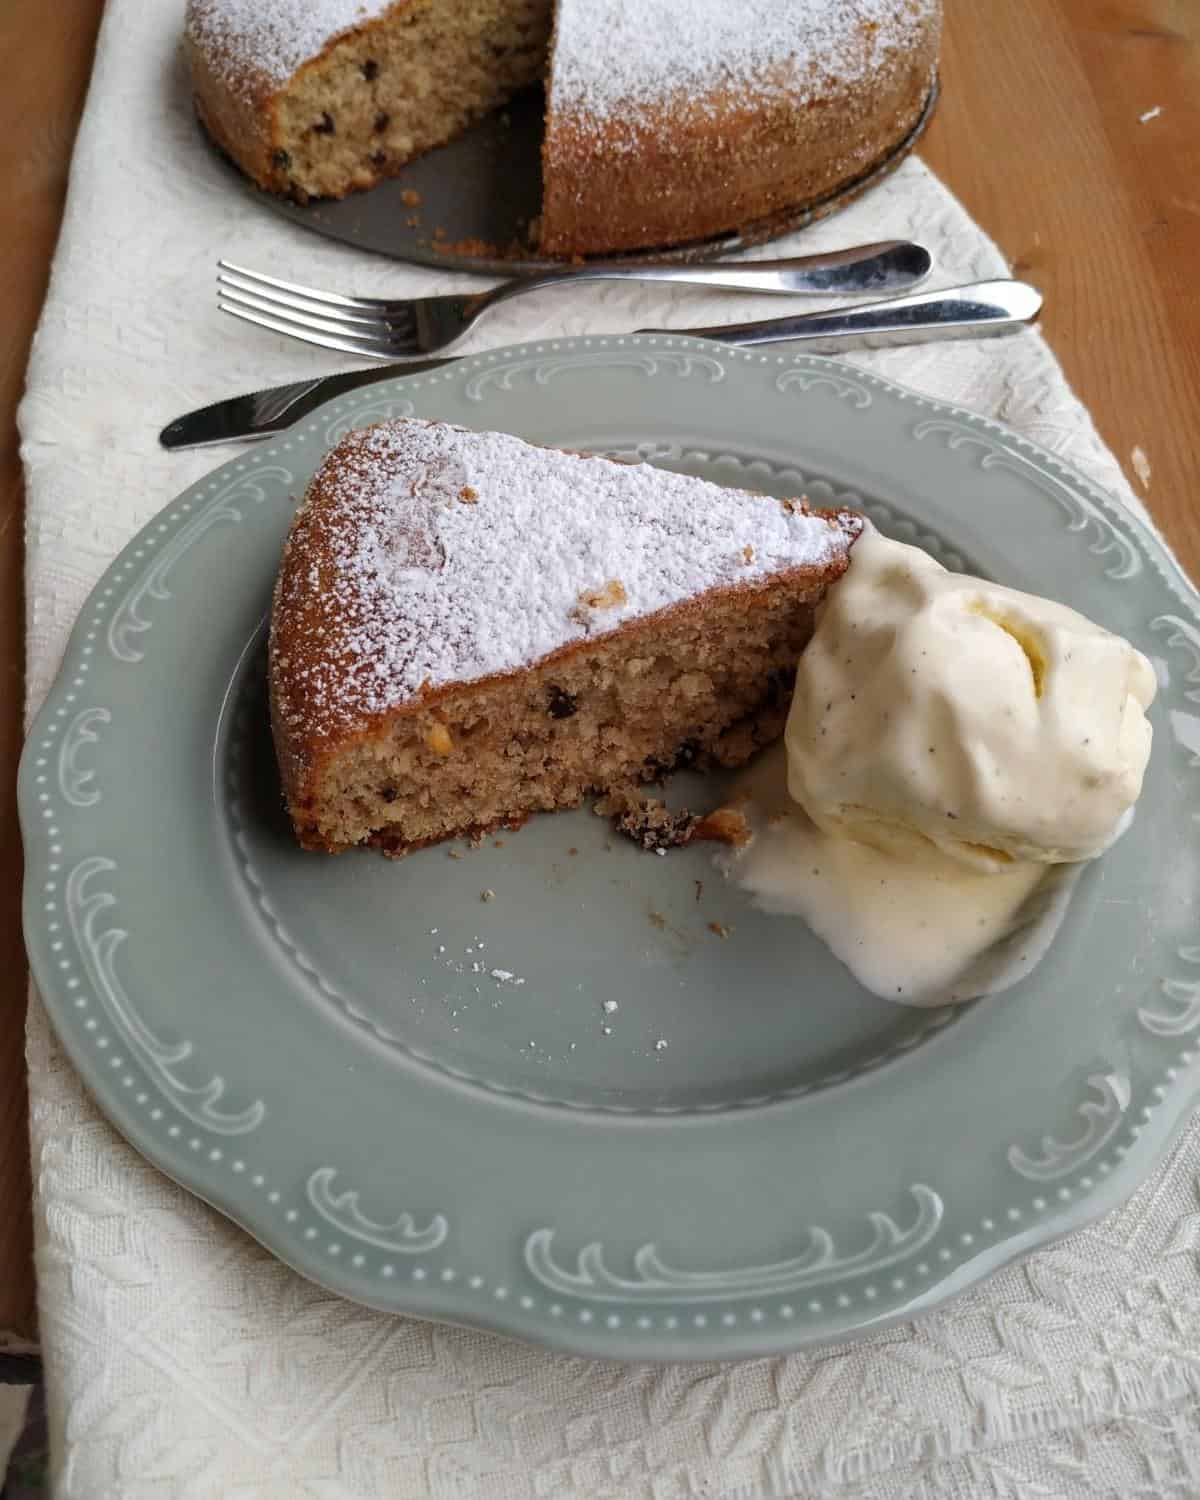 A slice of Hazelnuts Cake in a grey plate and white linen. The slice show the hazelnuts baked inside and the whipped cream on top